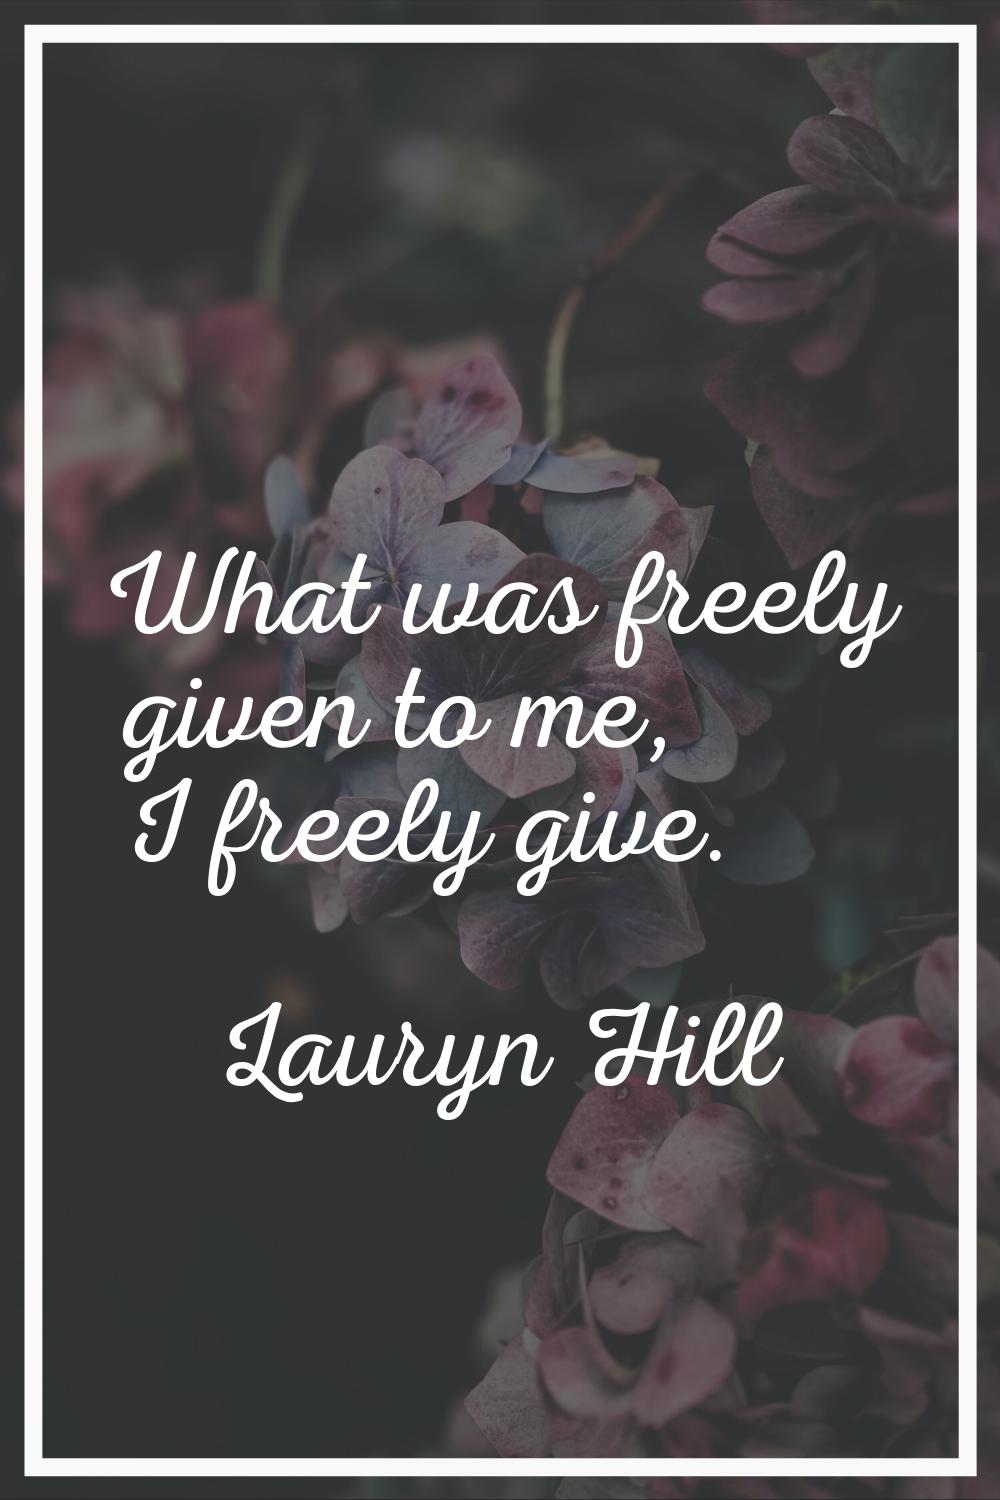 What was freely given to me, I freely give.